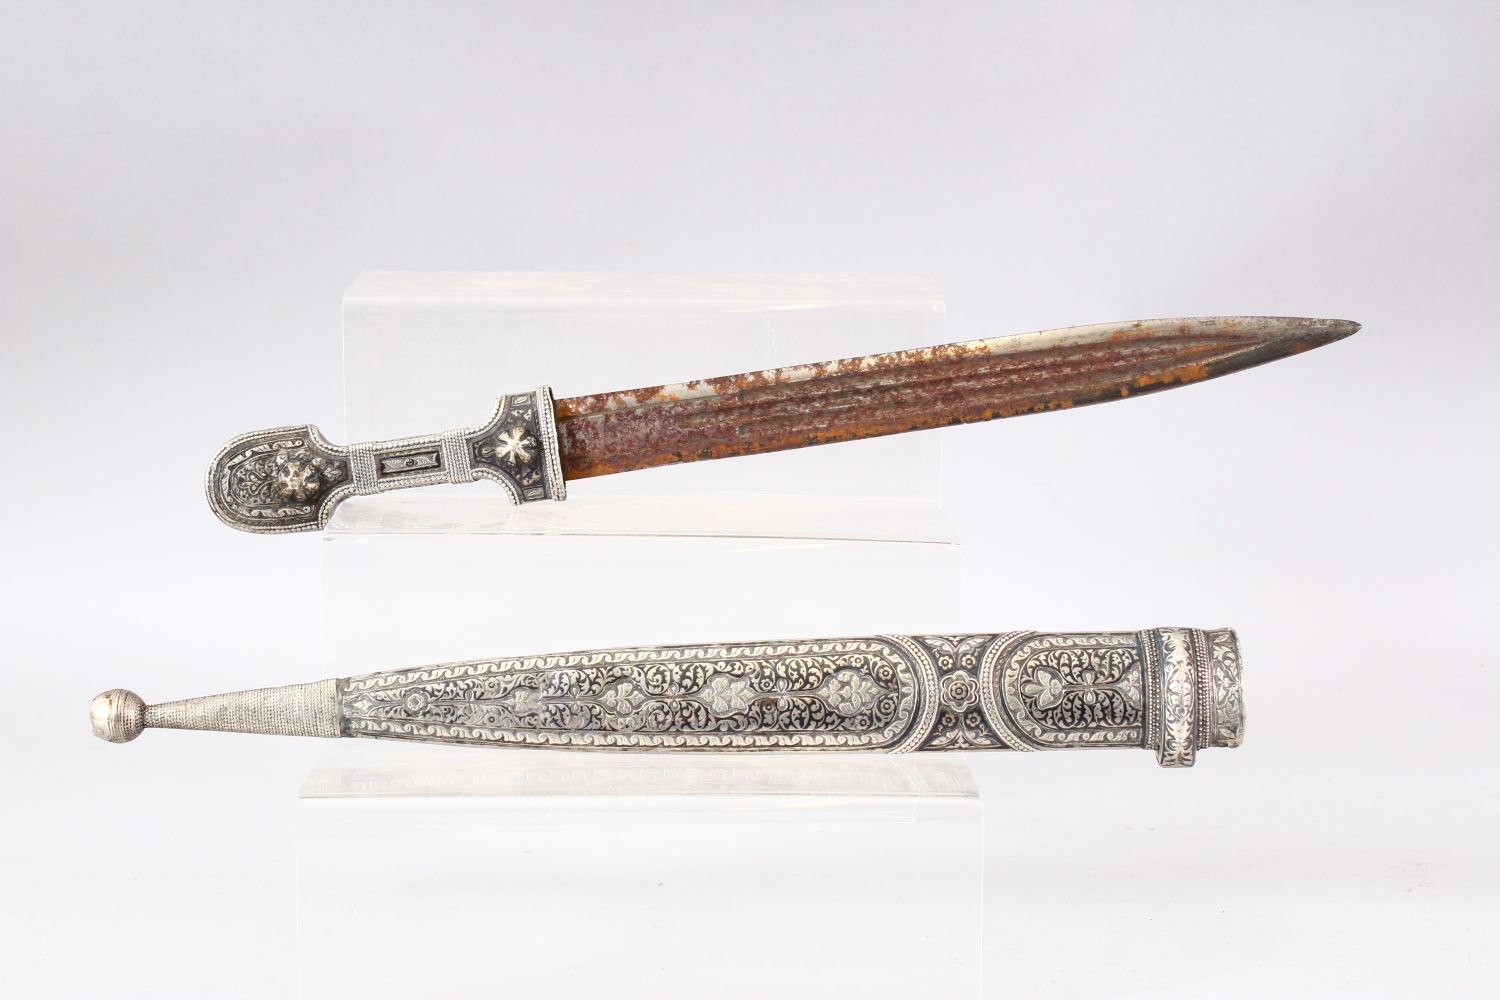 A 19TH CENTURY KINDJAL DAGGER and scabbard, 47.5cm long. - Image 6 of 8